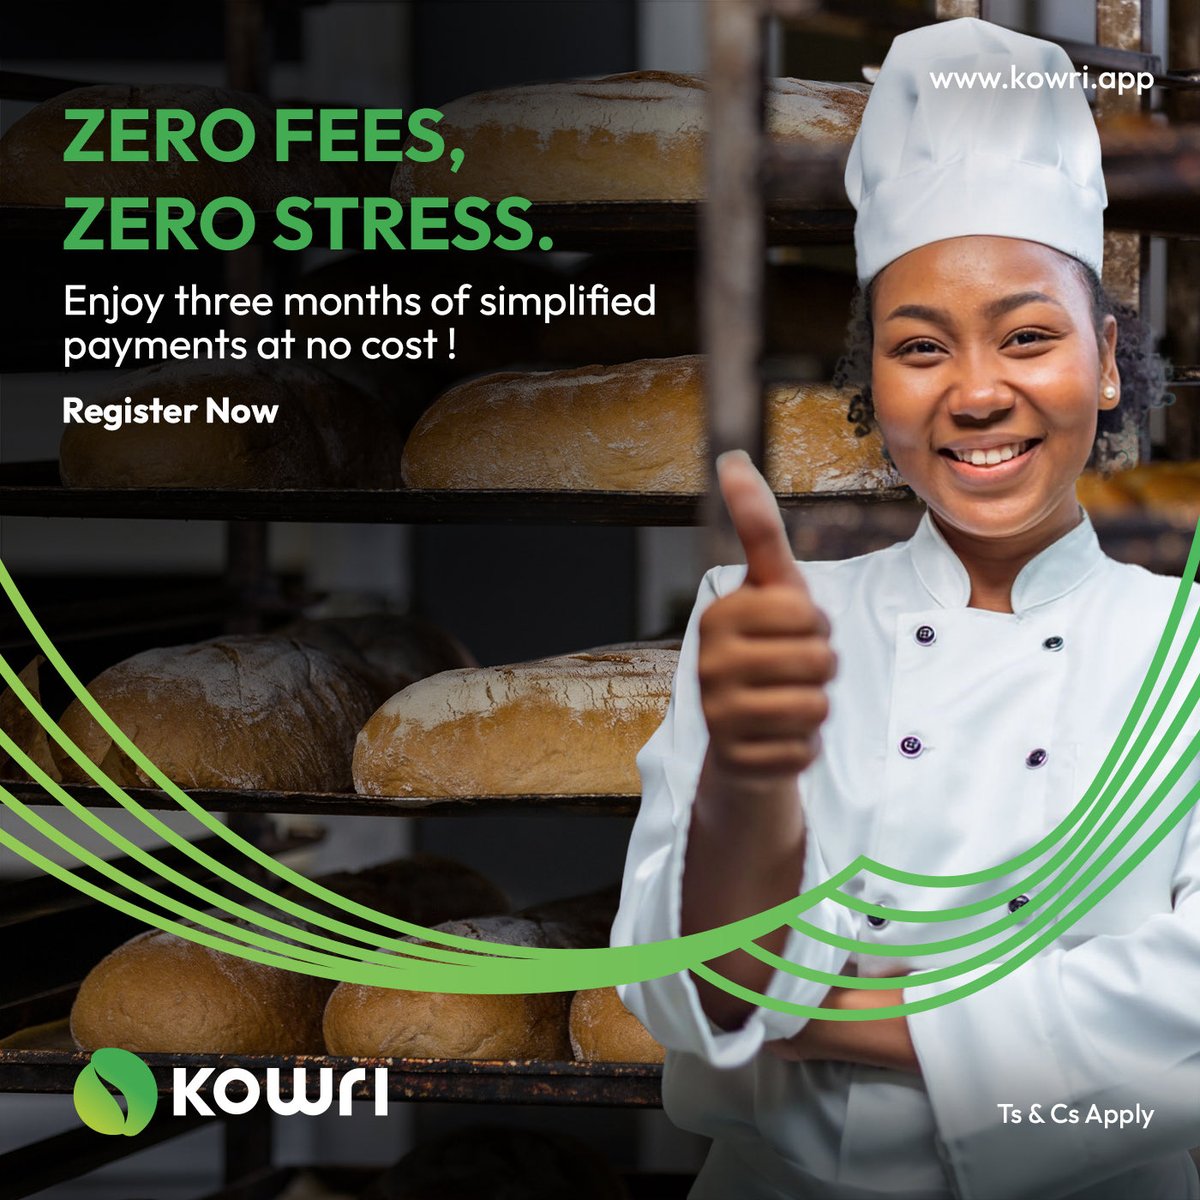 Ready to save big on fees? ✅ Sign up for Kowri for Business now and enjoy 3 months without paying ANY fees. Promotion is valid till June 21st, 2024. Call us on 0308251120 or send an email to support@kowri.app for immediate assistance. Ts&Cs apply. register.kowri.app